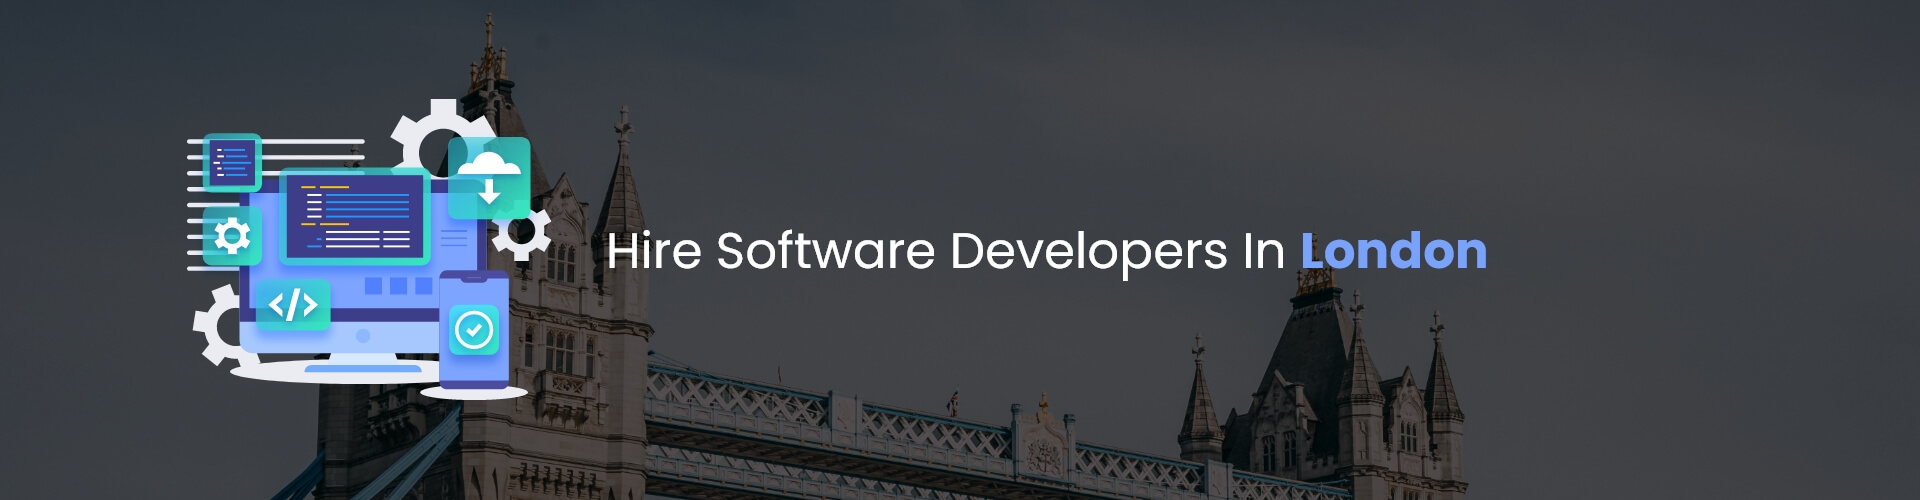 hire software developers in london